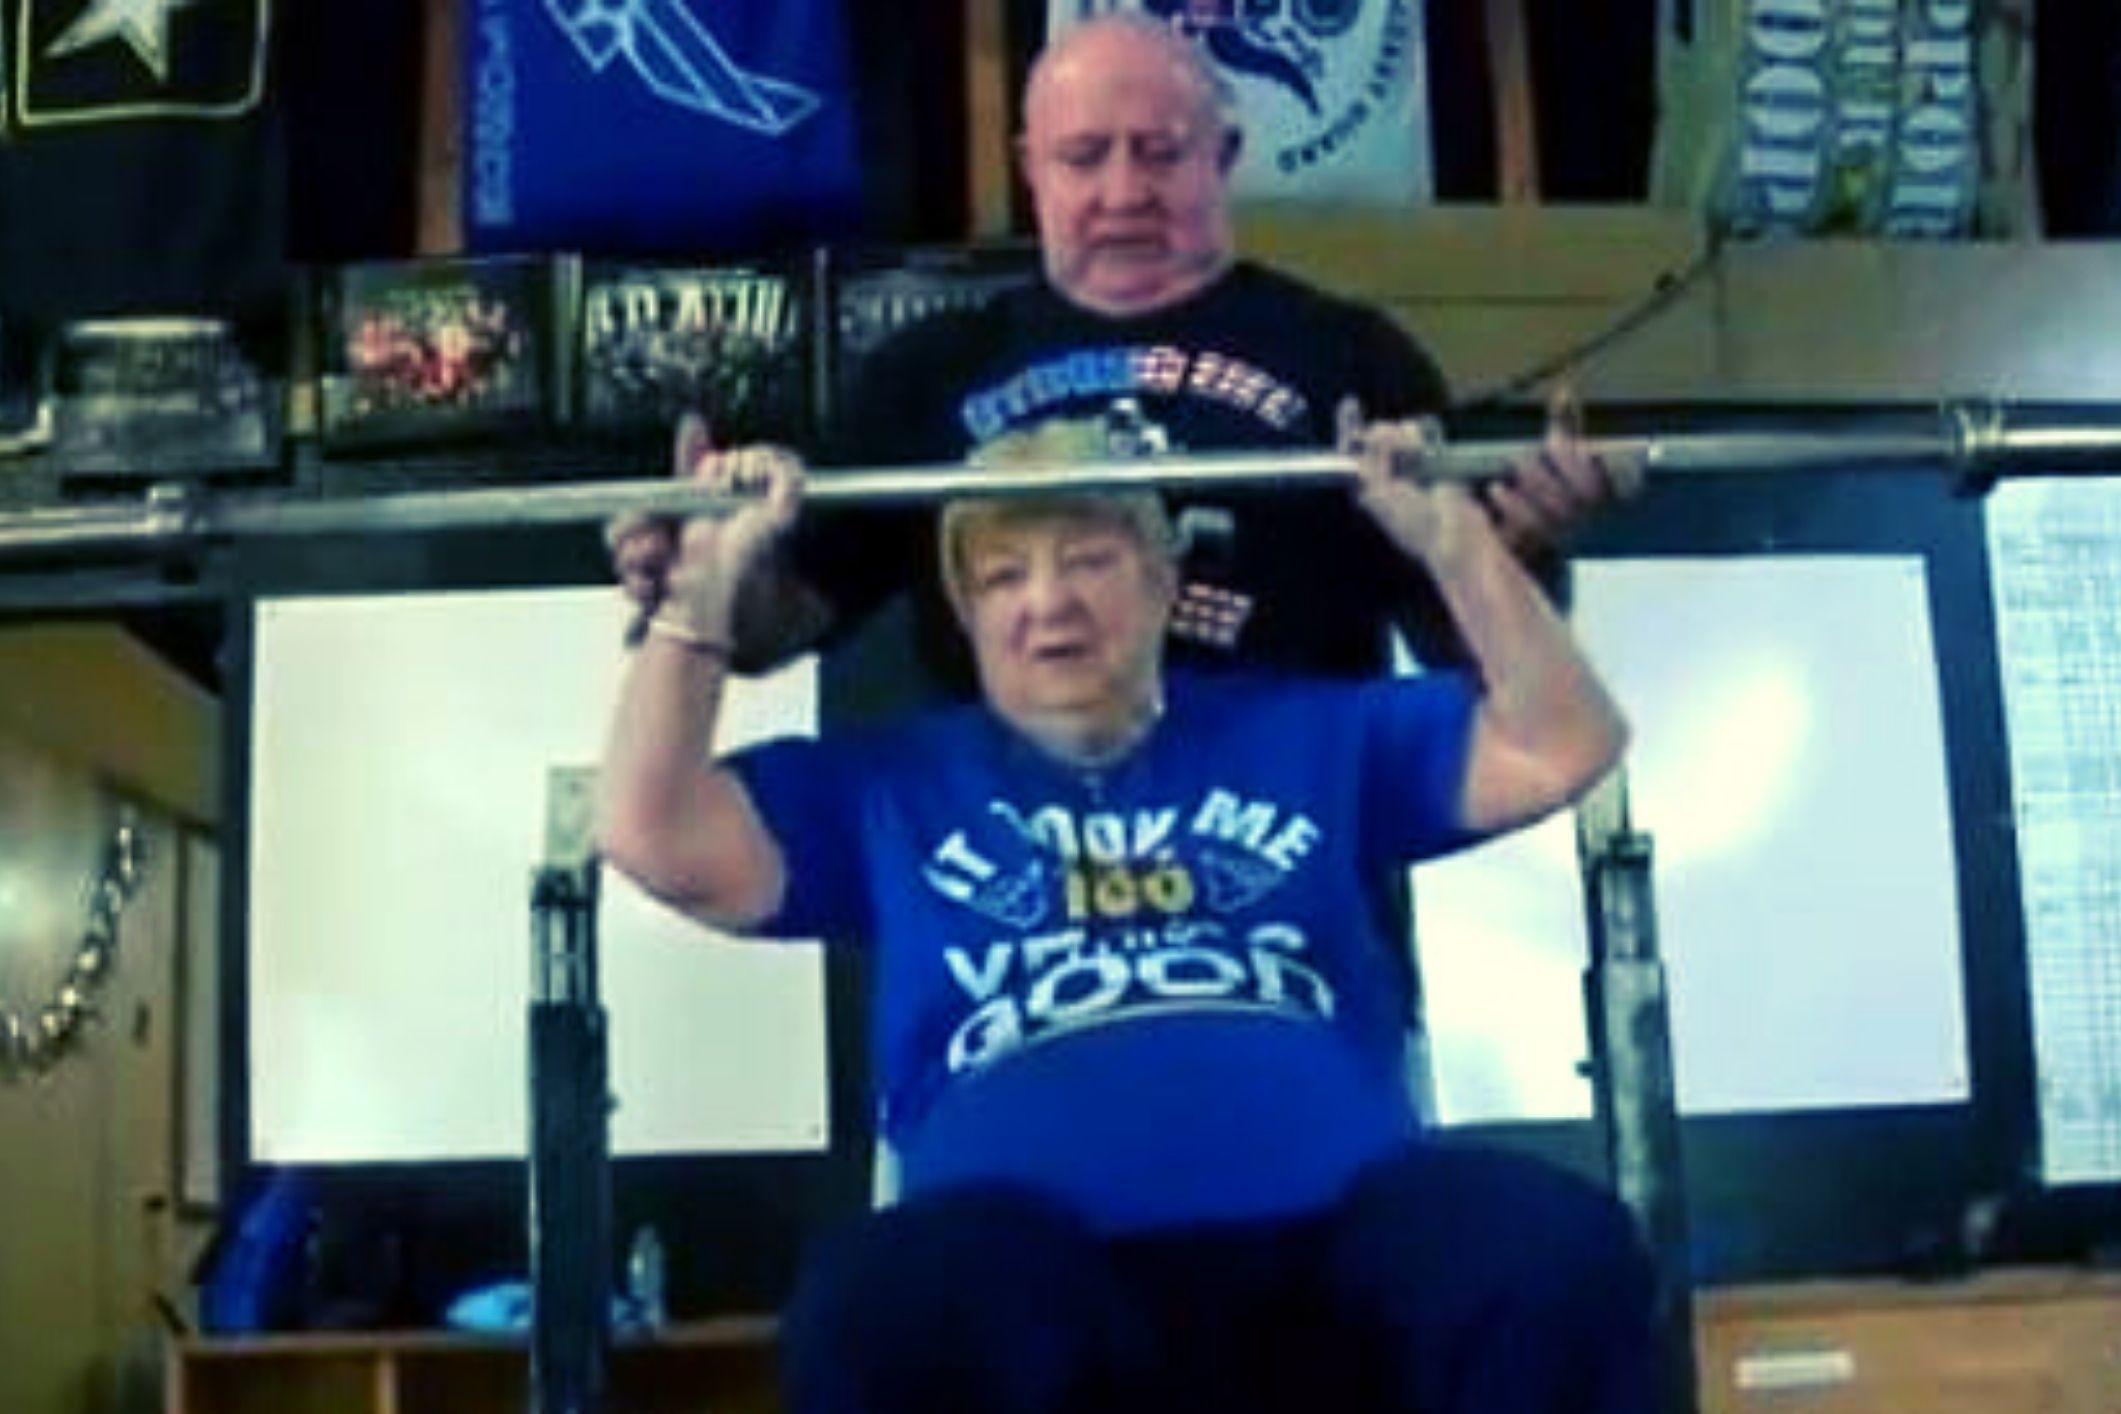 100-year-old woman sets Guinness World Record for weightlifting